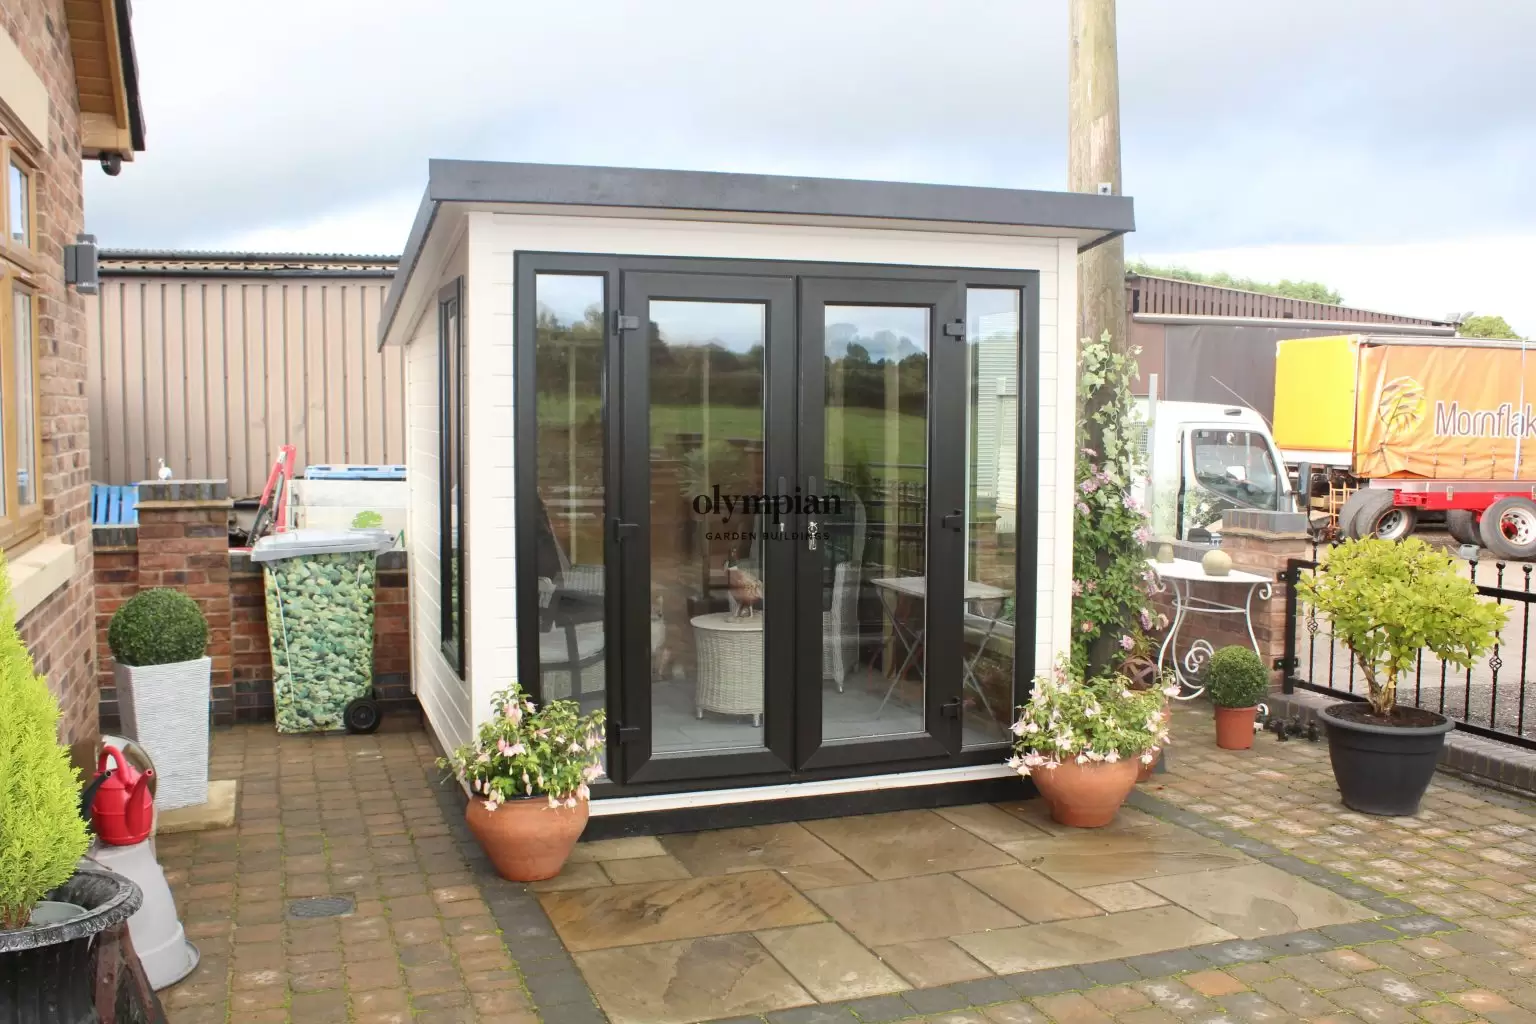 An 8ft x 8ft painted garden building with single-sloping roof and UPVC doors, in an open paved garden